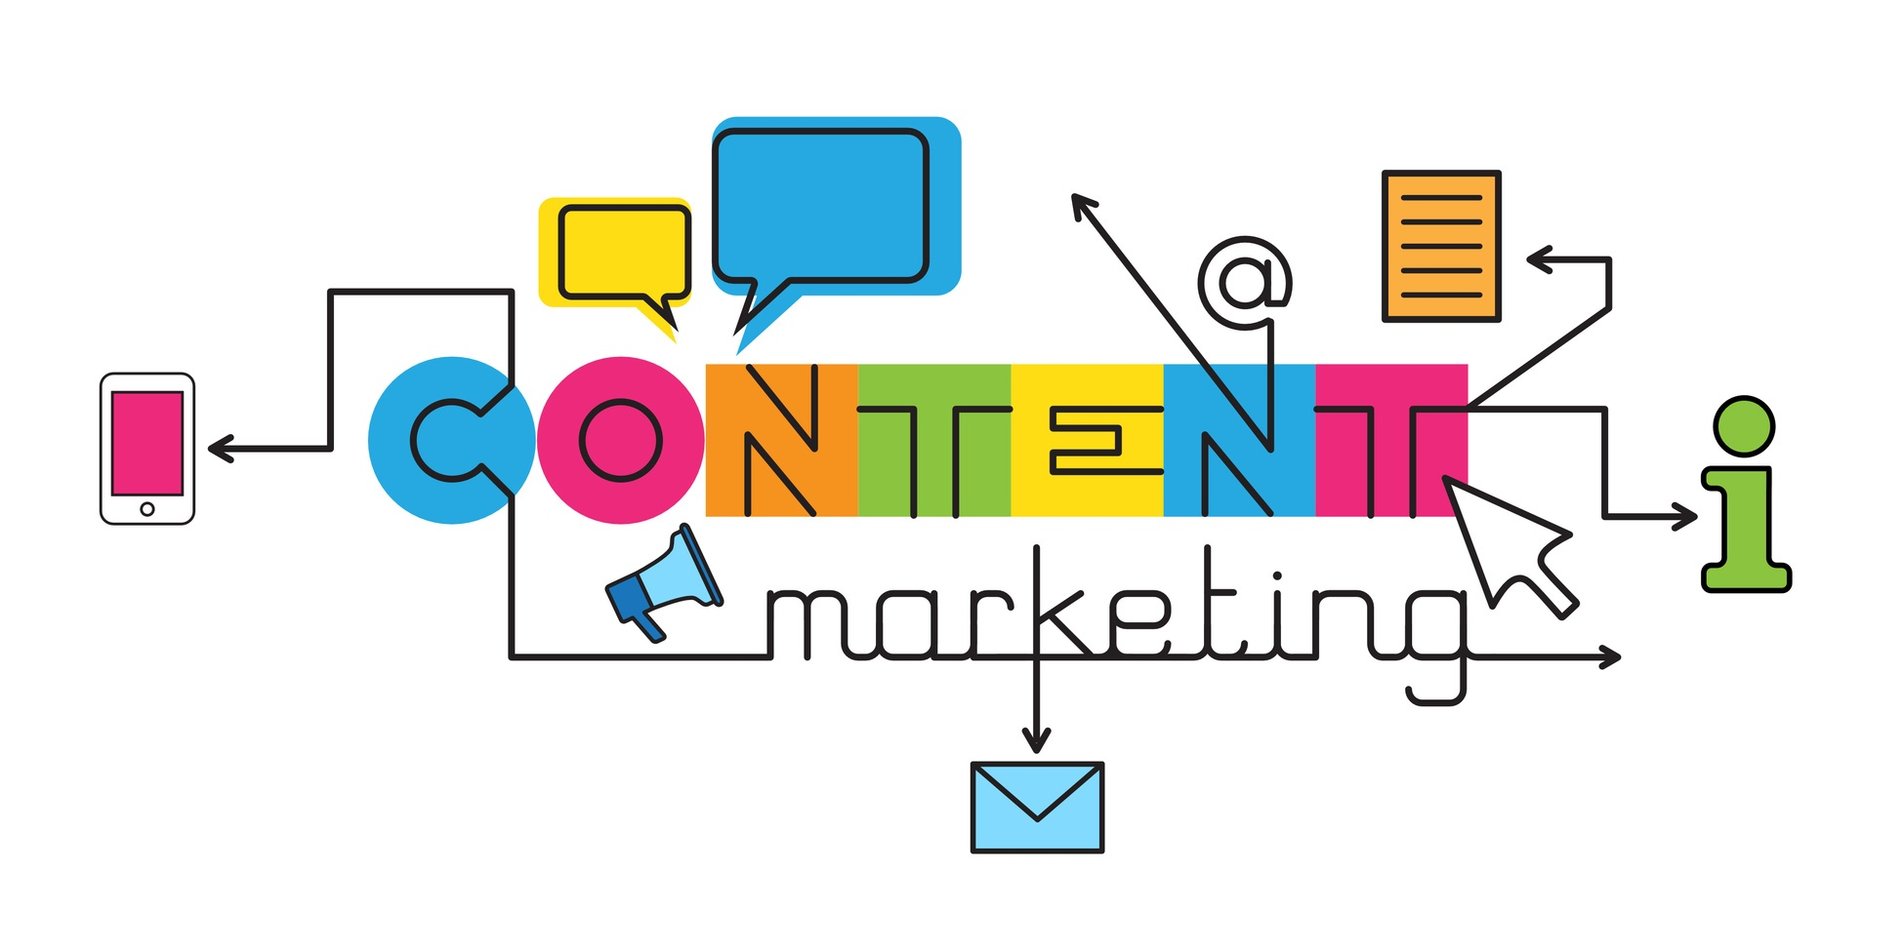 Beyond the Blog: Other Ideas for Marketing Content